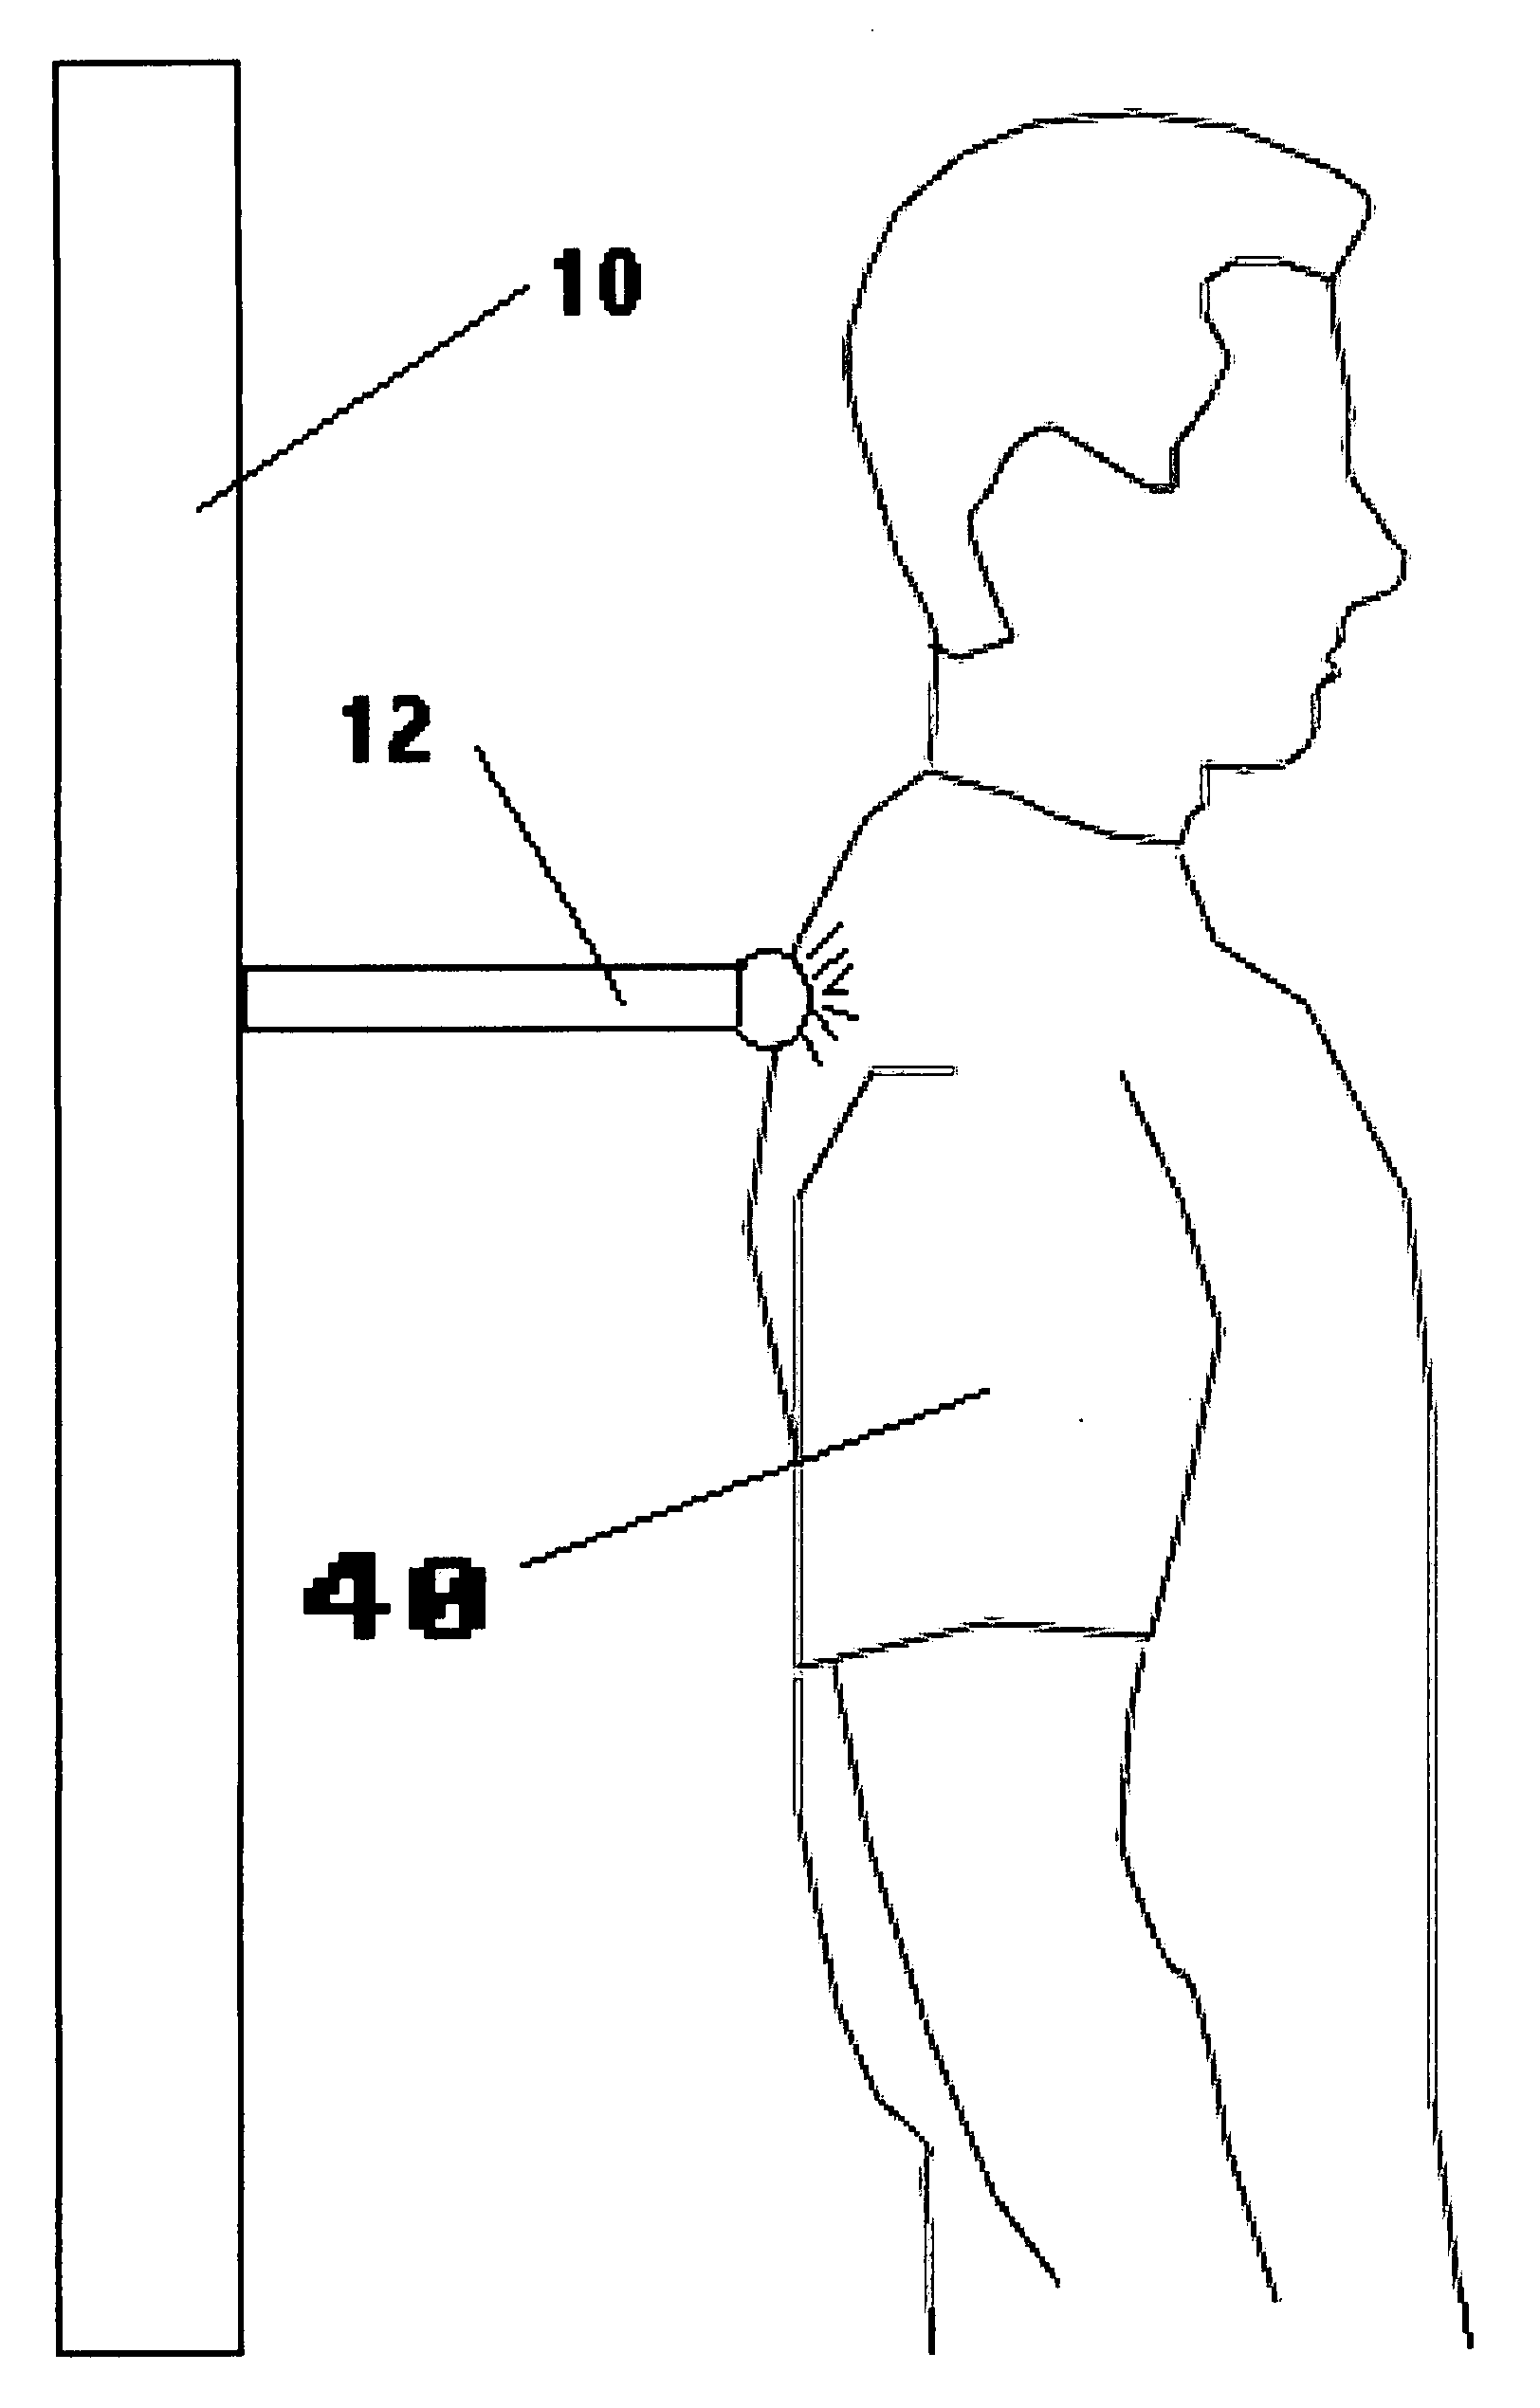 Trigger point therapy device